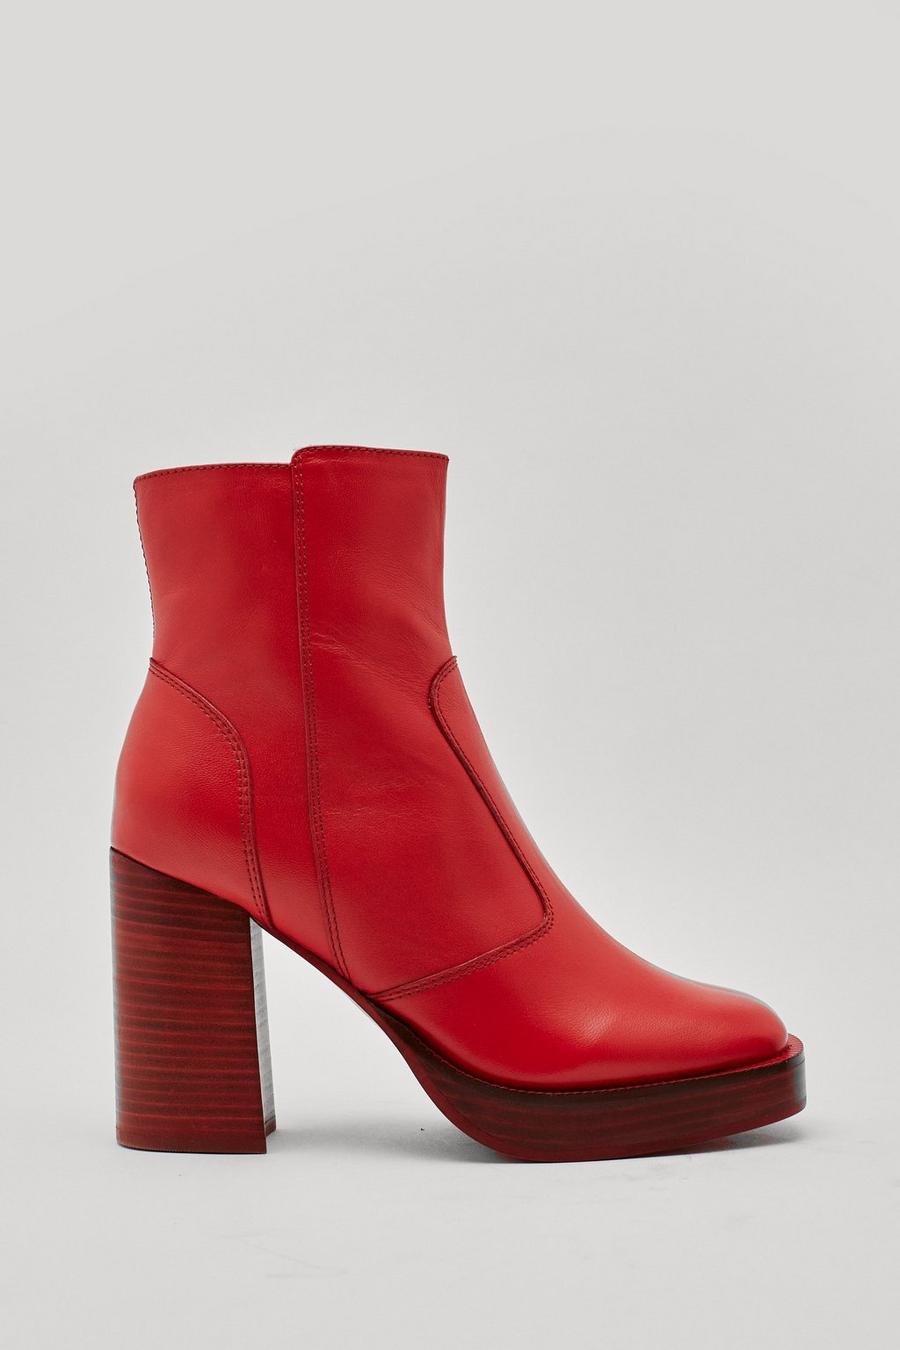 Real Leather Platform High Ankle Boots